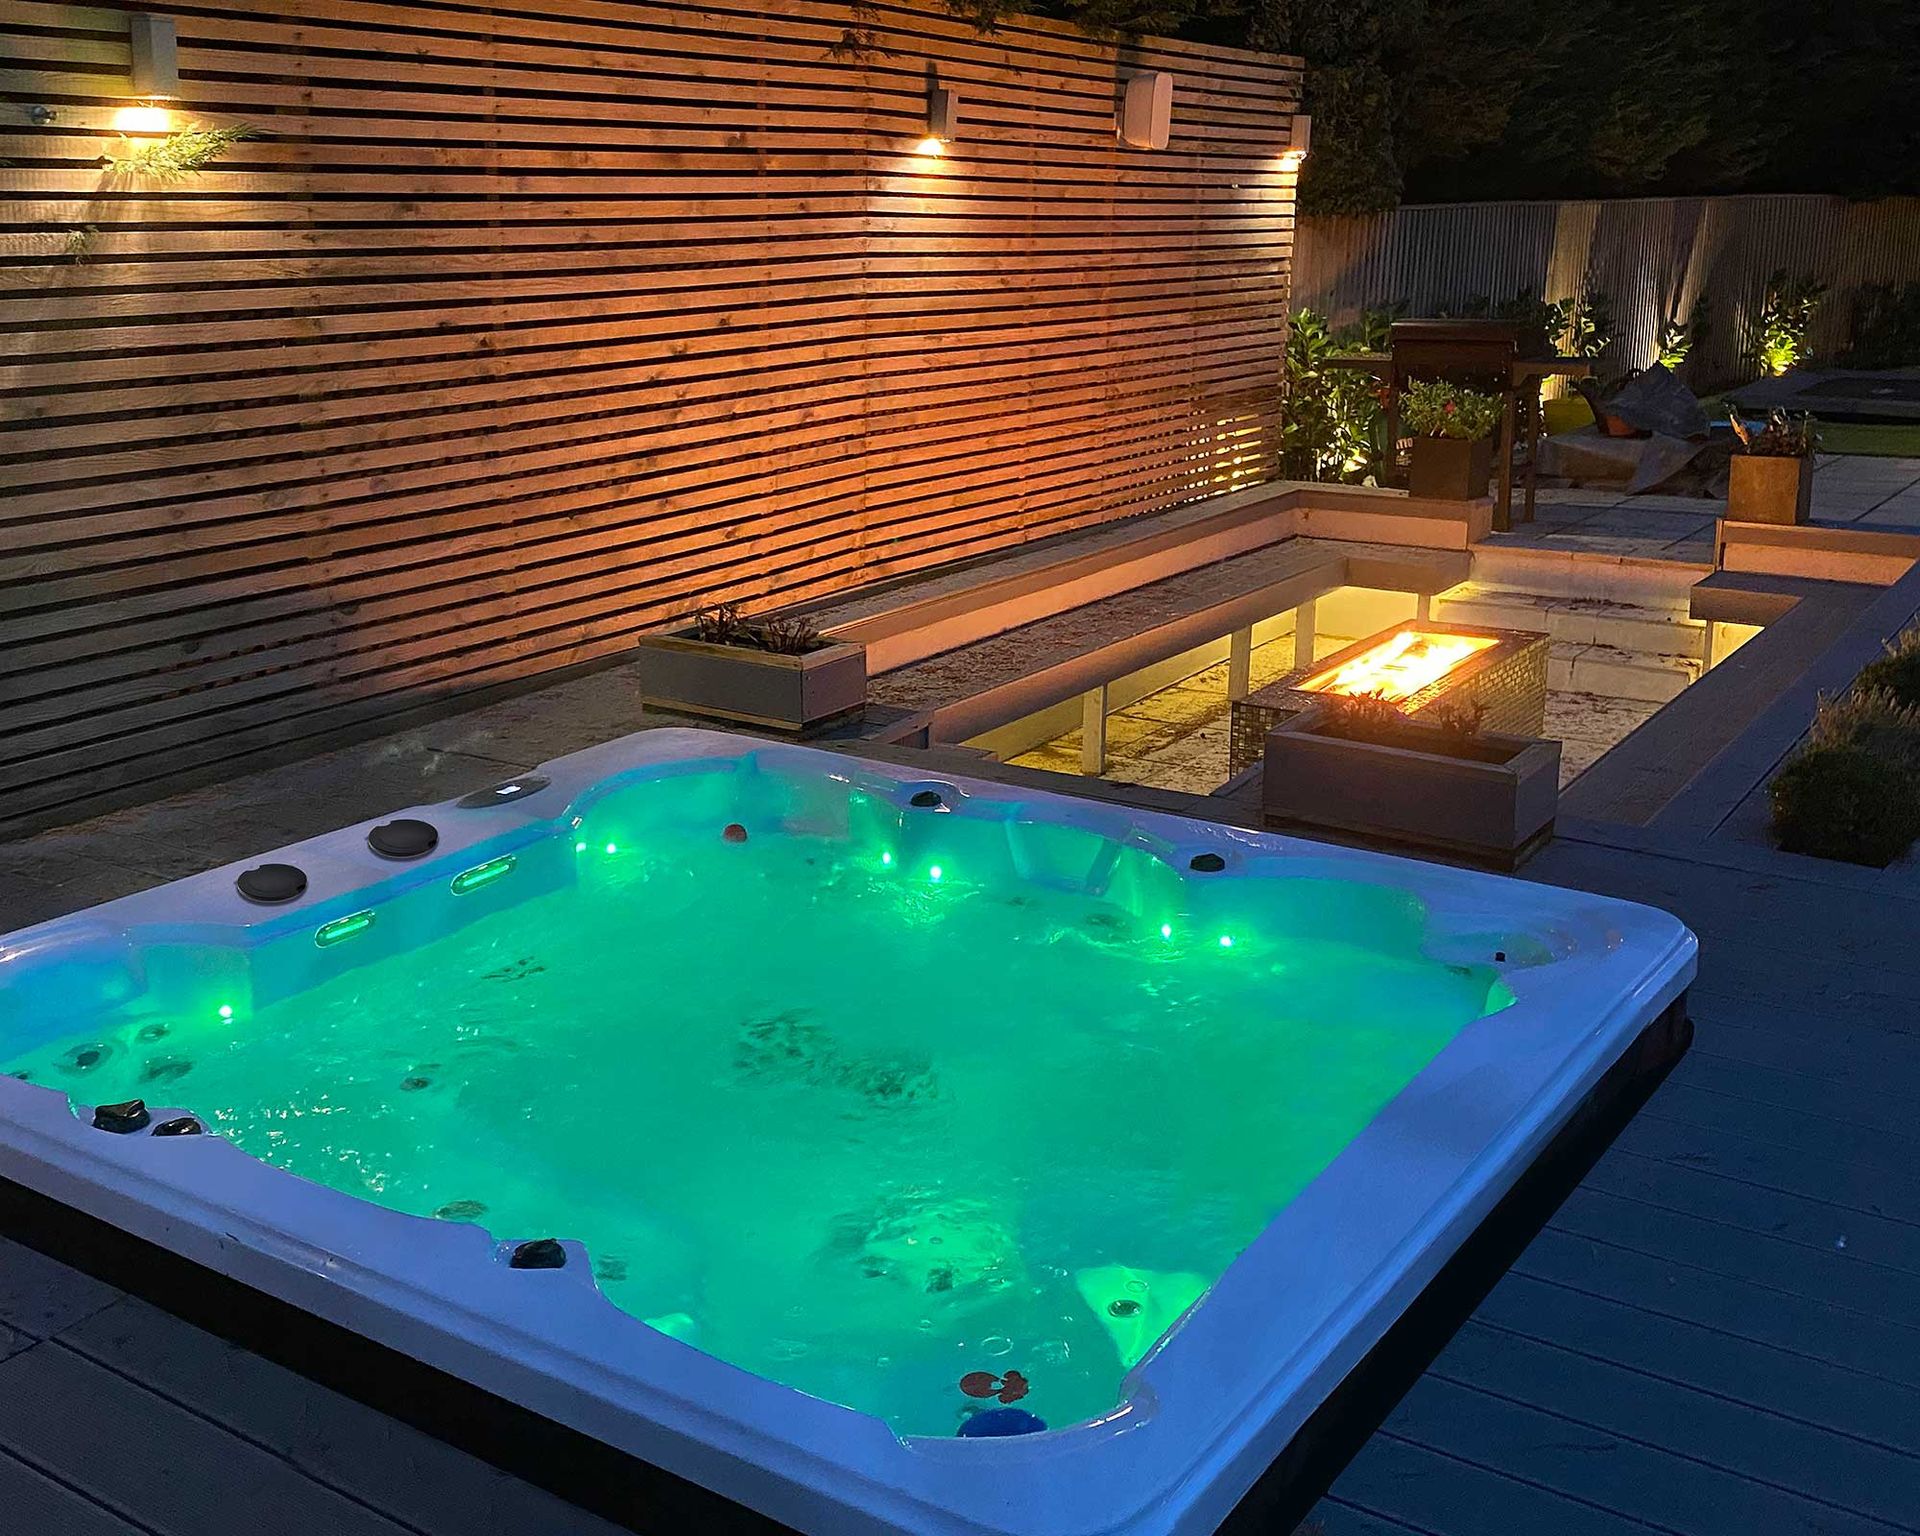 <p>                     Hot tubs aren't just for daytime use if you add in some chic lighting solutions. And we're not just talking about wall lights and festoons to adorn the surrounding space – consider choosing a tub that illuminates, too.                   </p>                                      <p>                     An enticing glow like this will up the ambiance instantly – it's a great addition if you're on the lookout for a garden party. Pair it with a sunken seating space, complete with cozy fire pit, for the ultimate alfresco entertaining zone.                   </p>